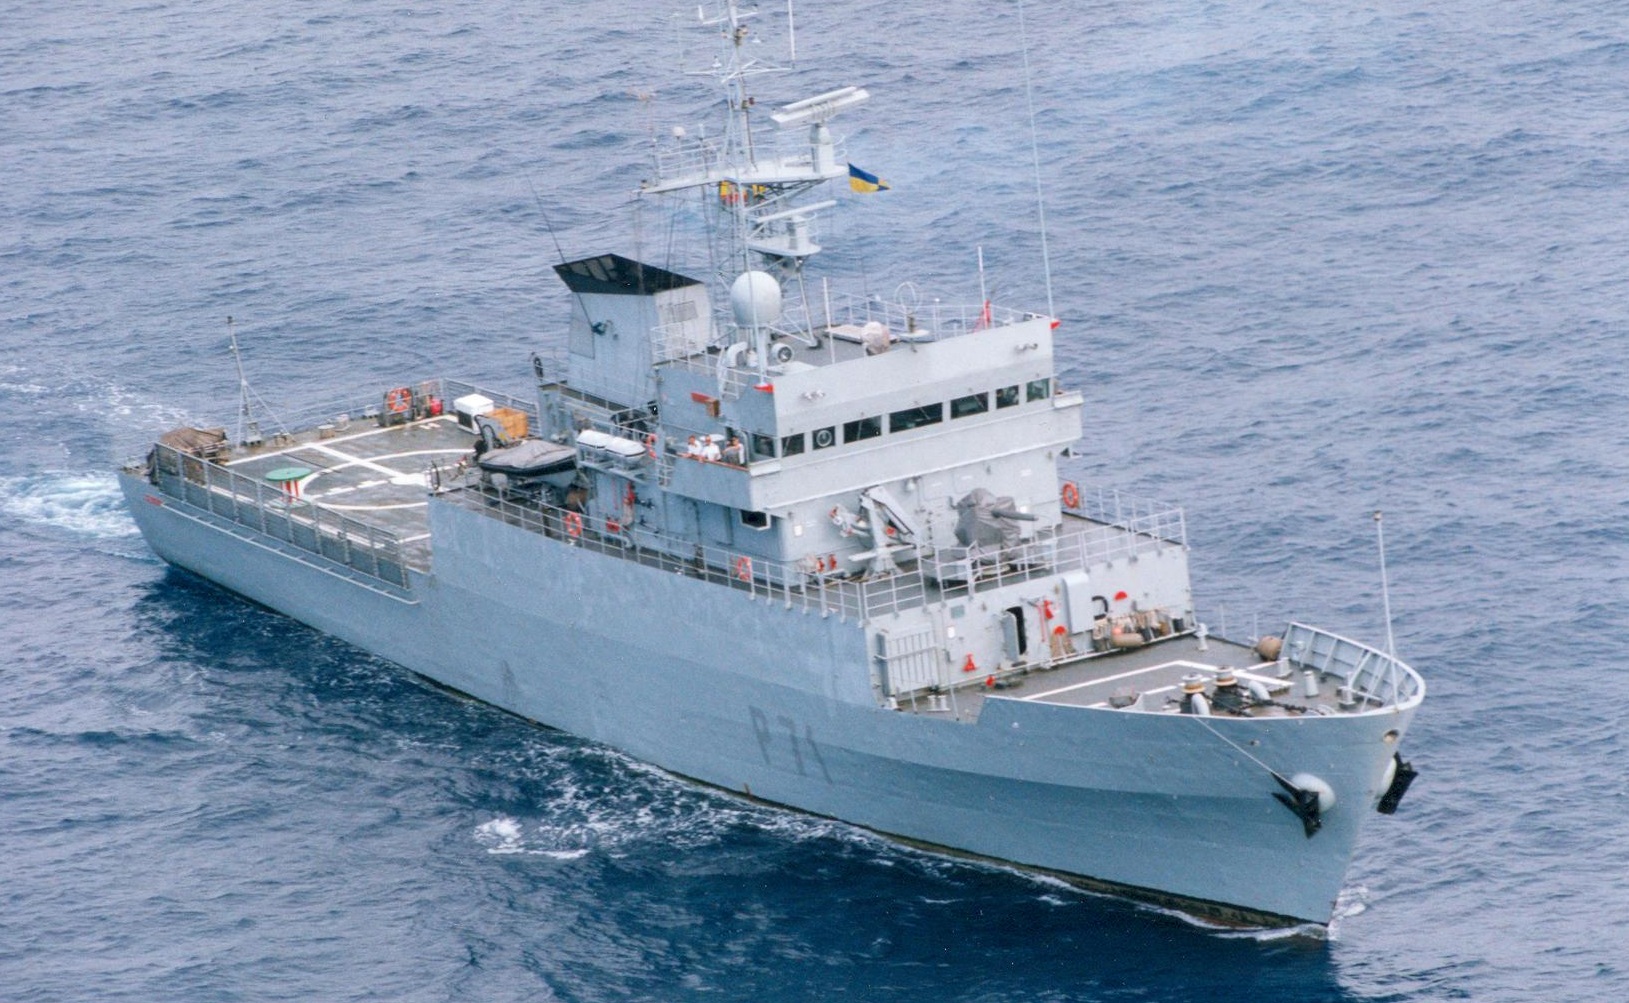 The 'Serviola' integrates the national maritime space permanent control operations